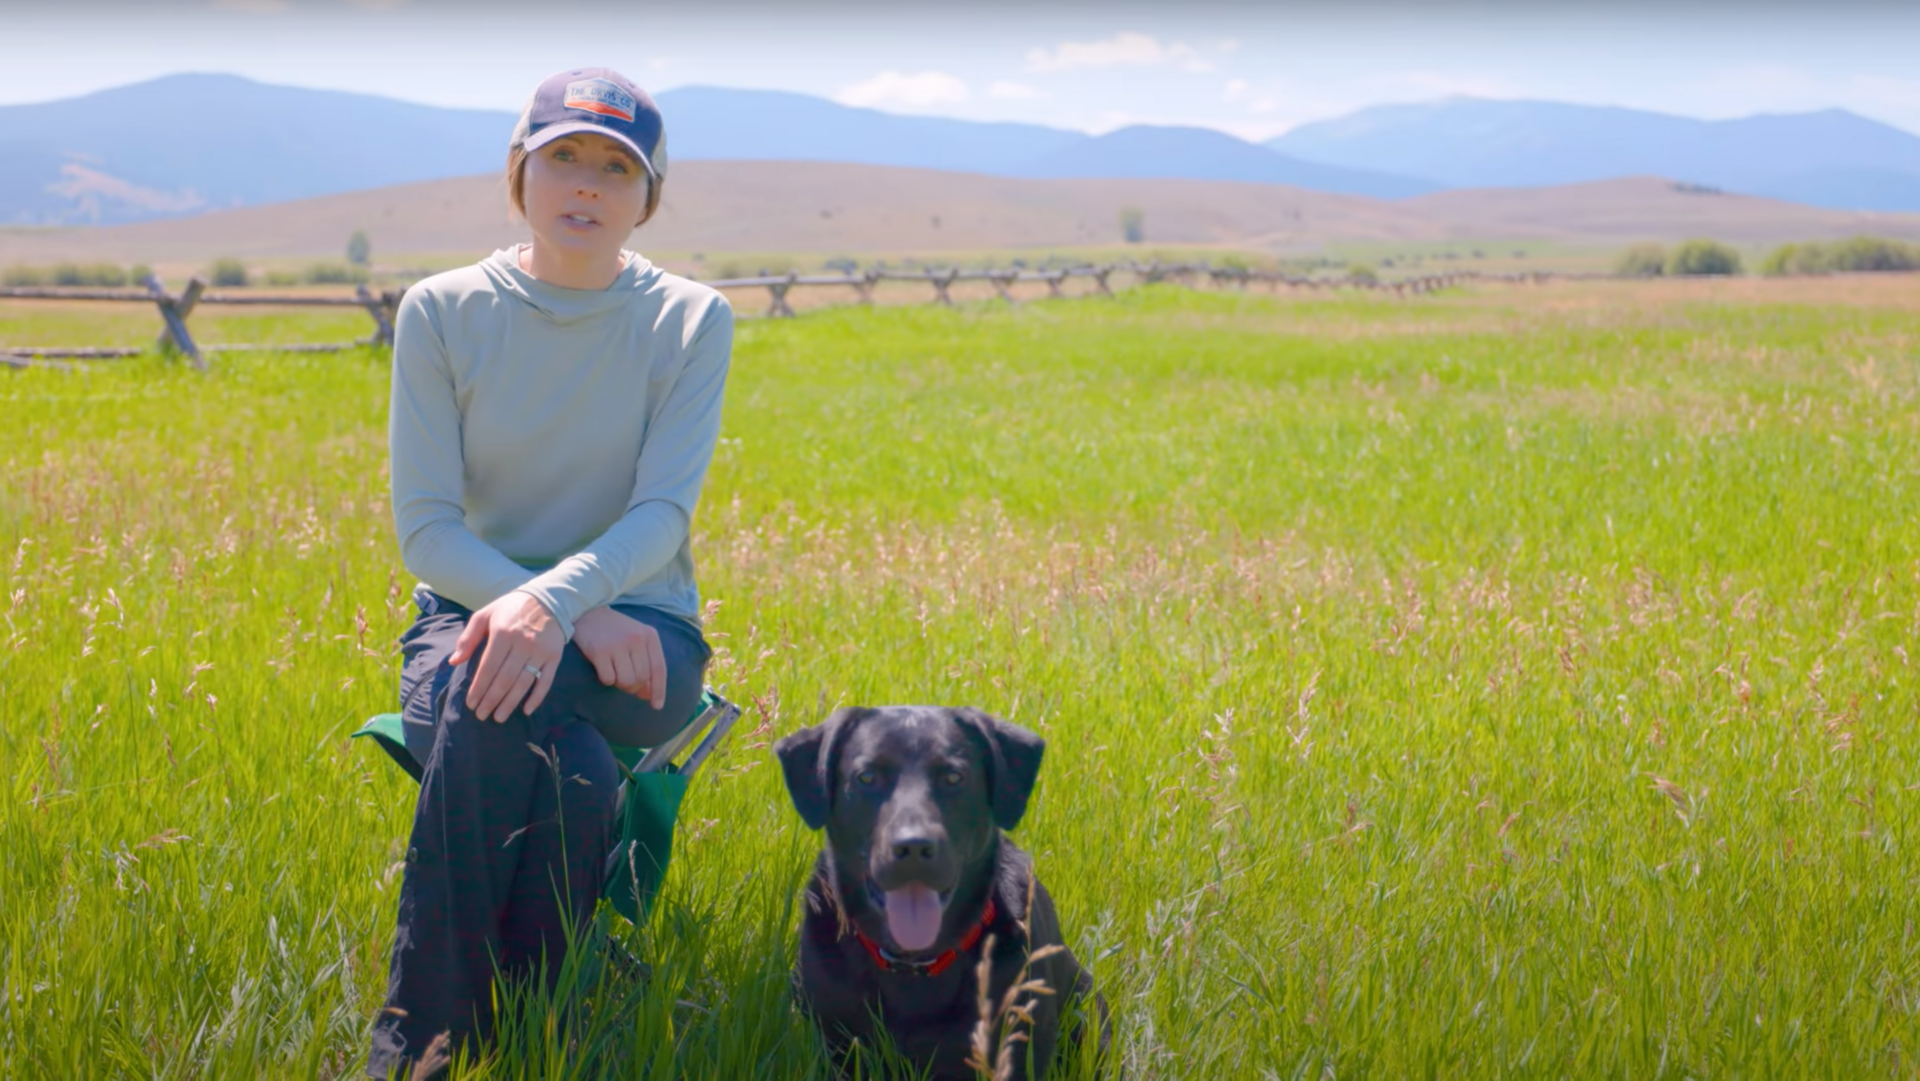 A woman and her blaack Labrador retriever sitting in the tall grass of an open field